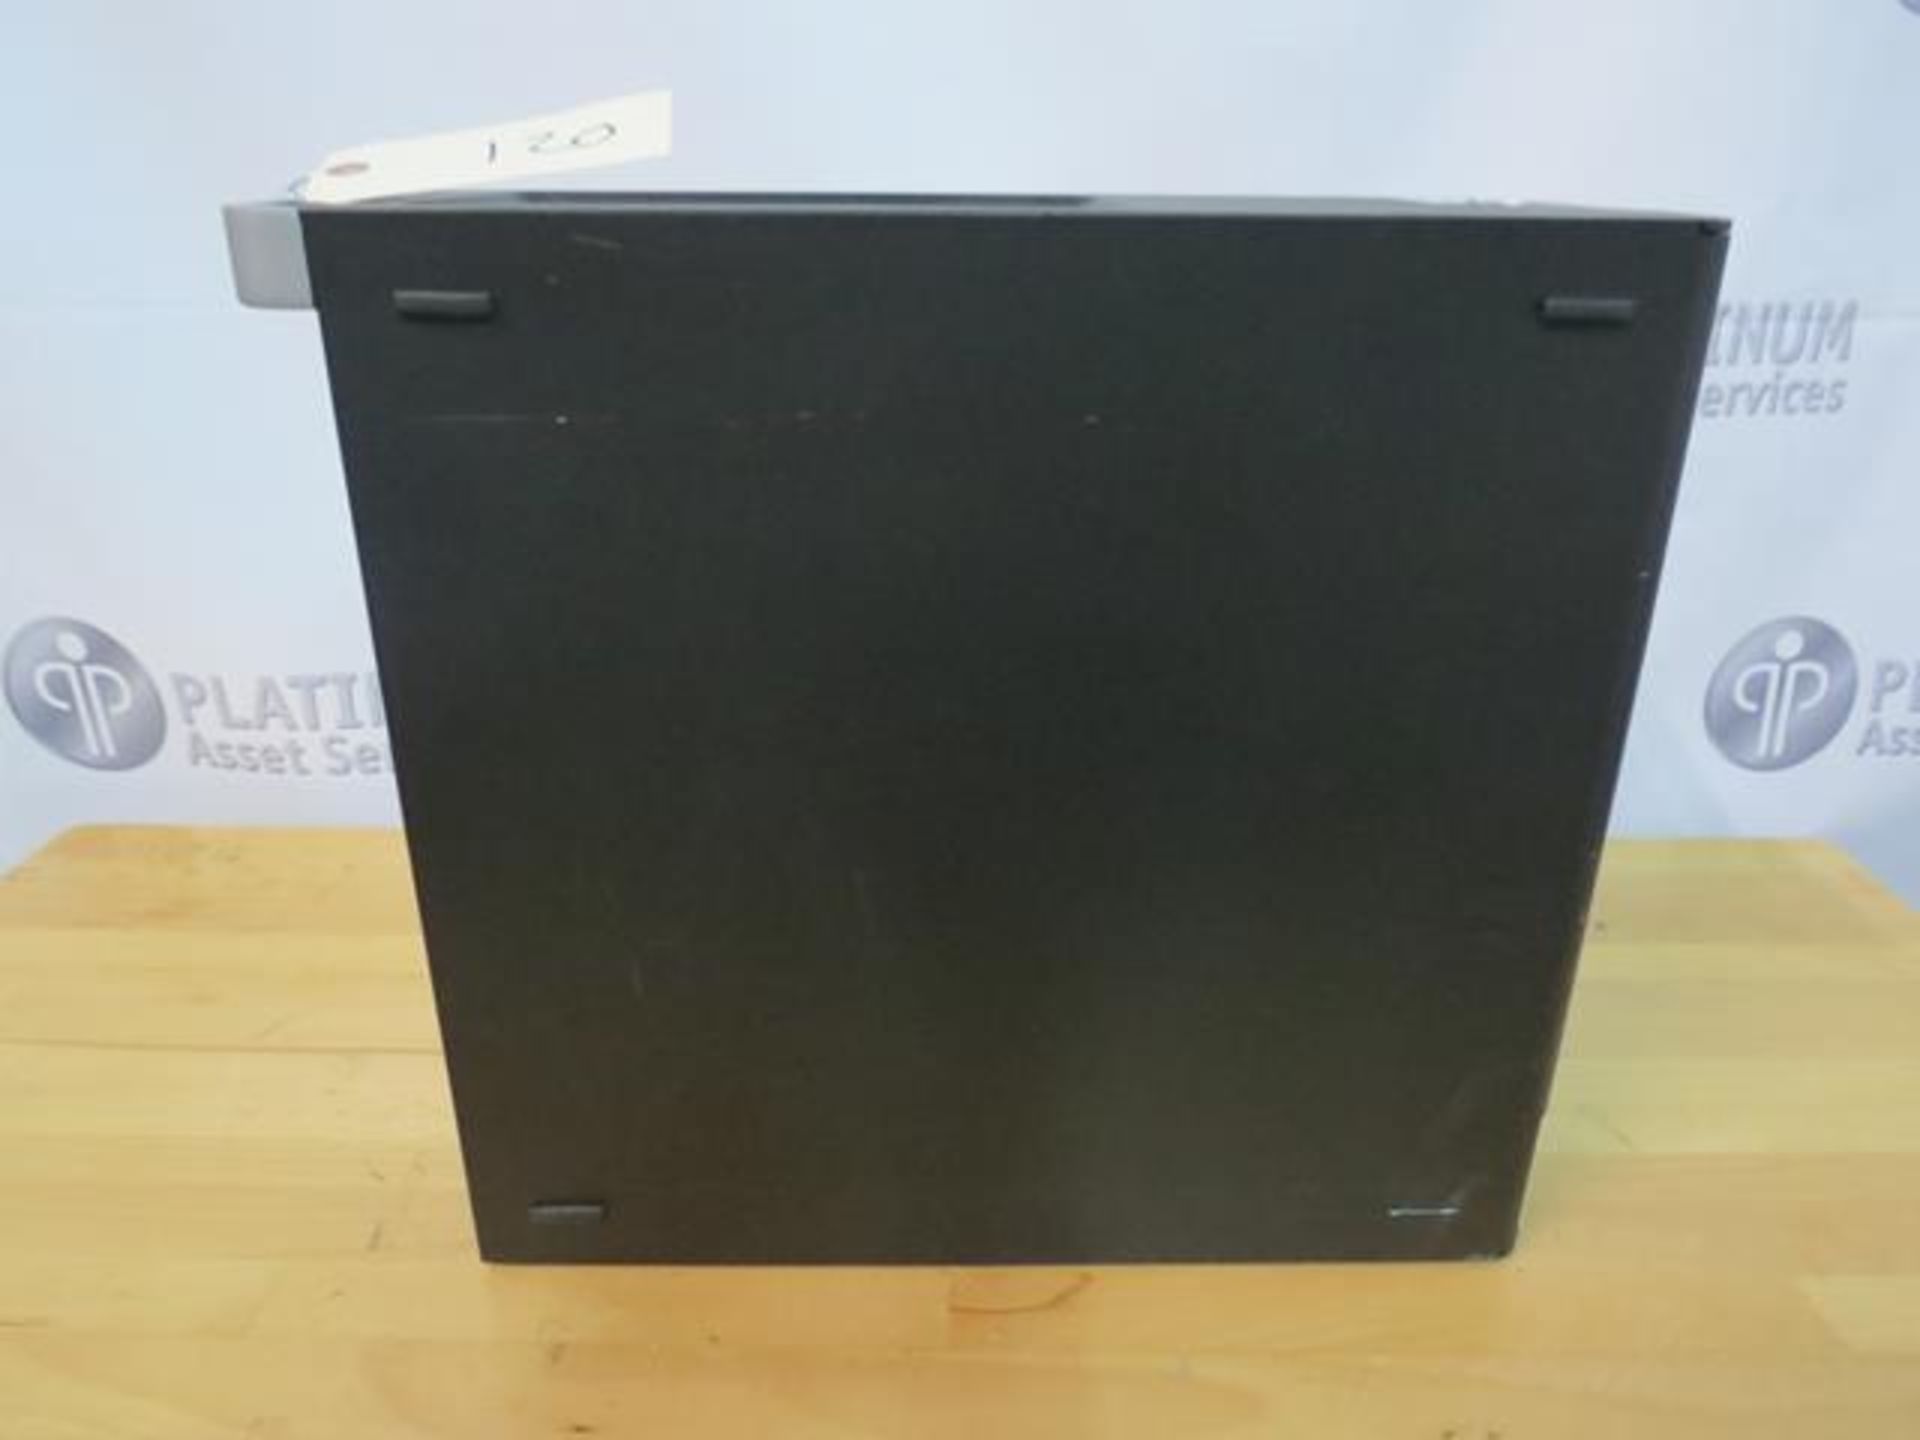 DELL, PRECISION T5600, DESKTOP WORKSTATION (UNIT DOES NOT BOOT UP) (TAG#120) - Image 5 of 6